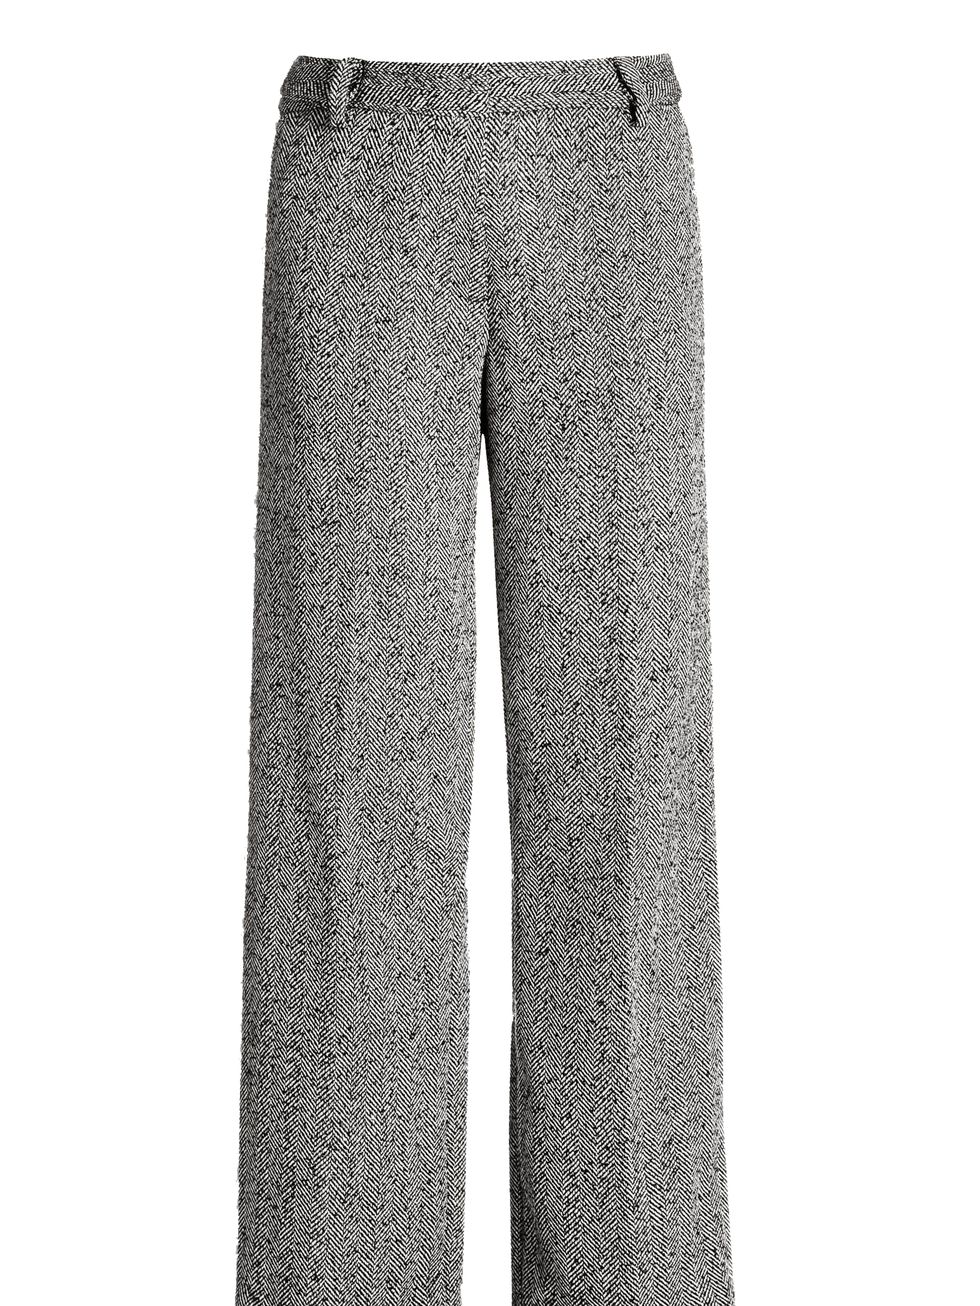 <p>Wide leg trousers are everywhere this season. This pair in a classic Herringbone fabric, can be worn casually or dressed-up for work.</p>

<p><a href="http://www.next.co.uk/g4156s5#352444" target="_blank">Next</a> trousers, £35</p>